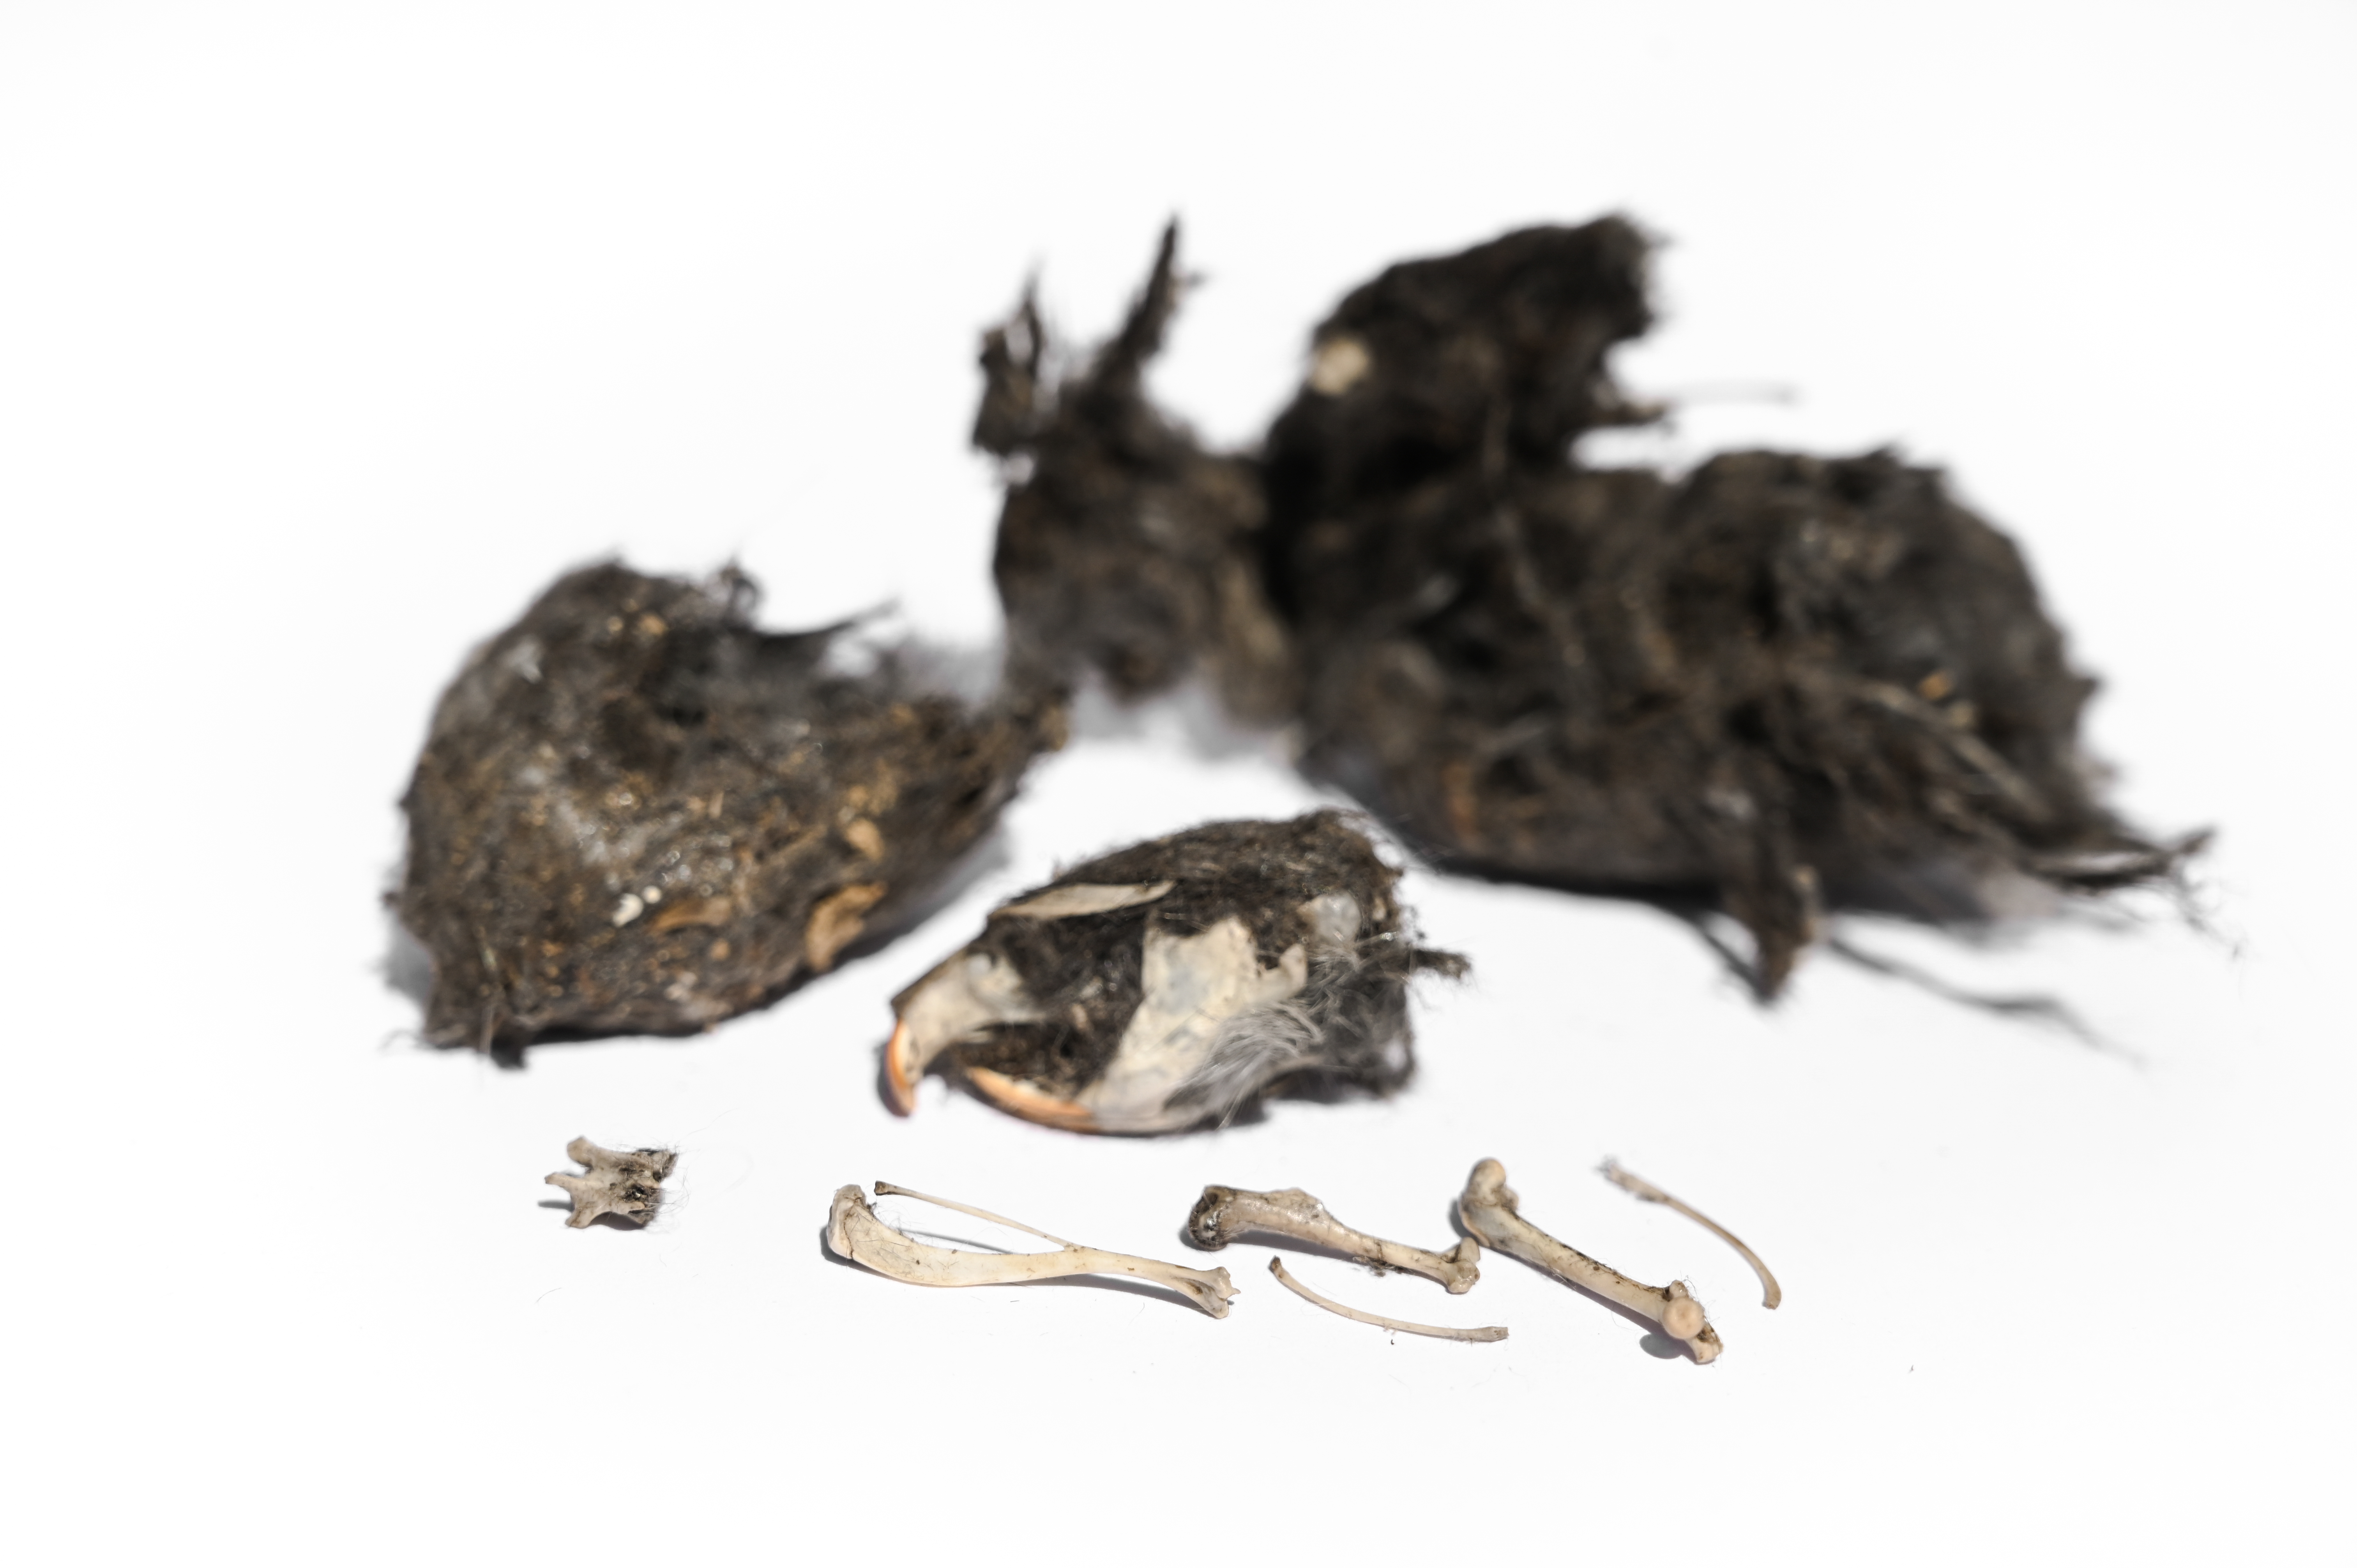 The Maine Owl Pellet Project